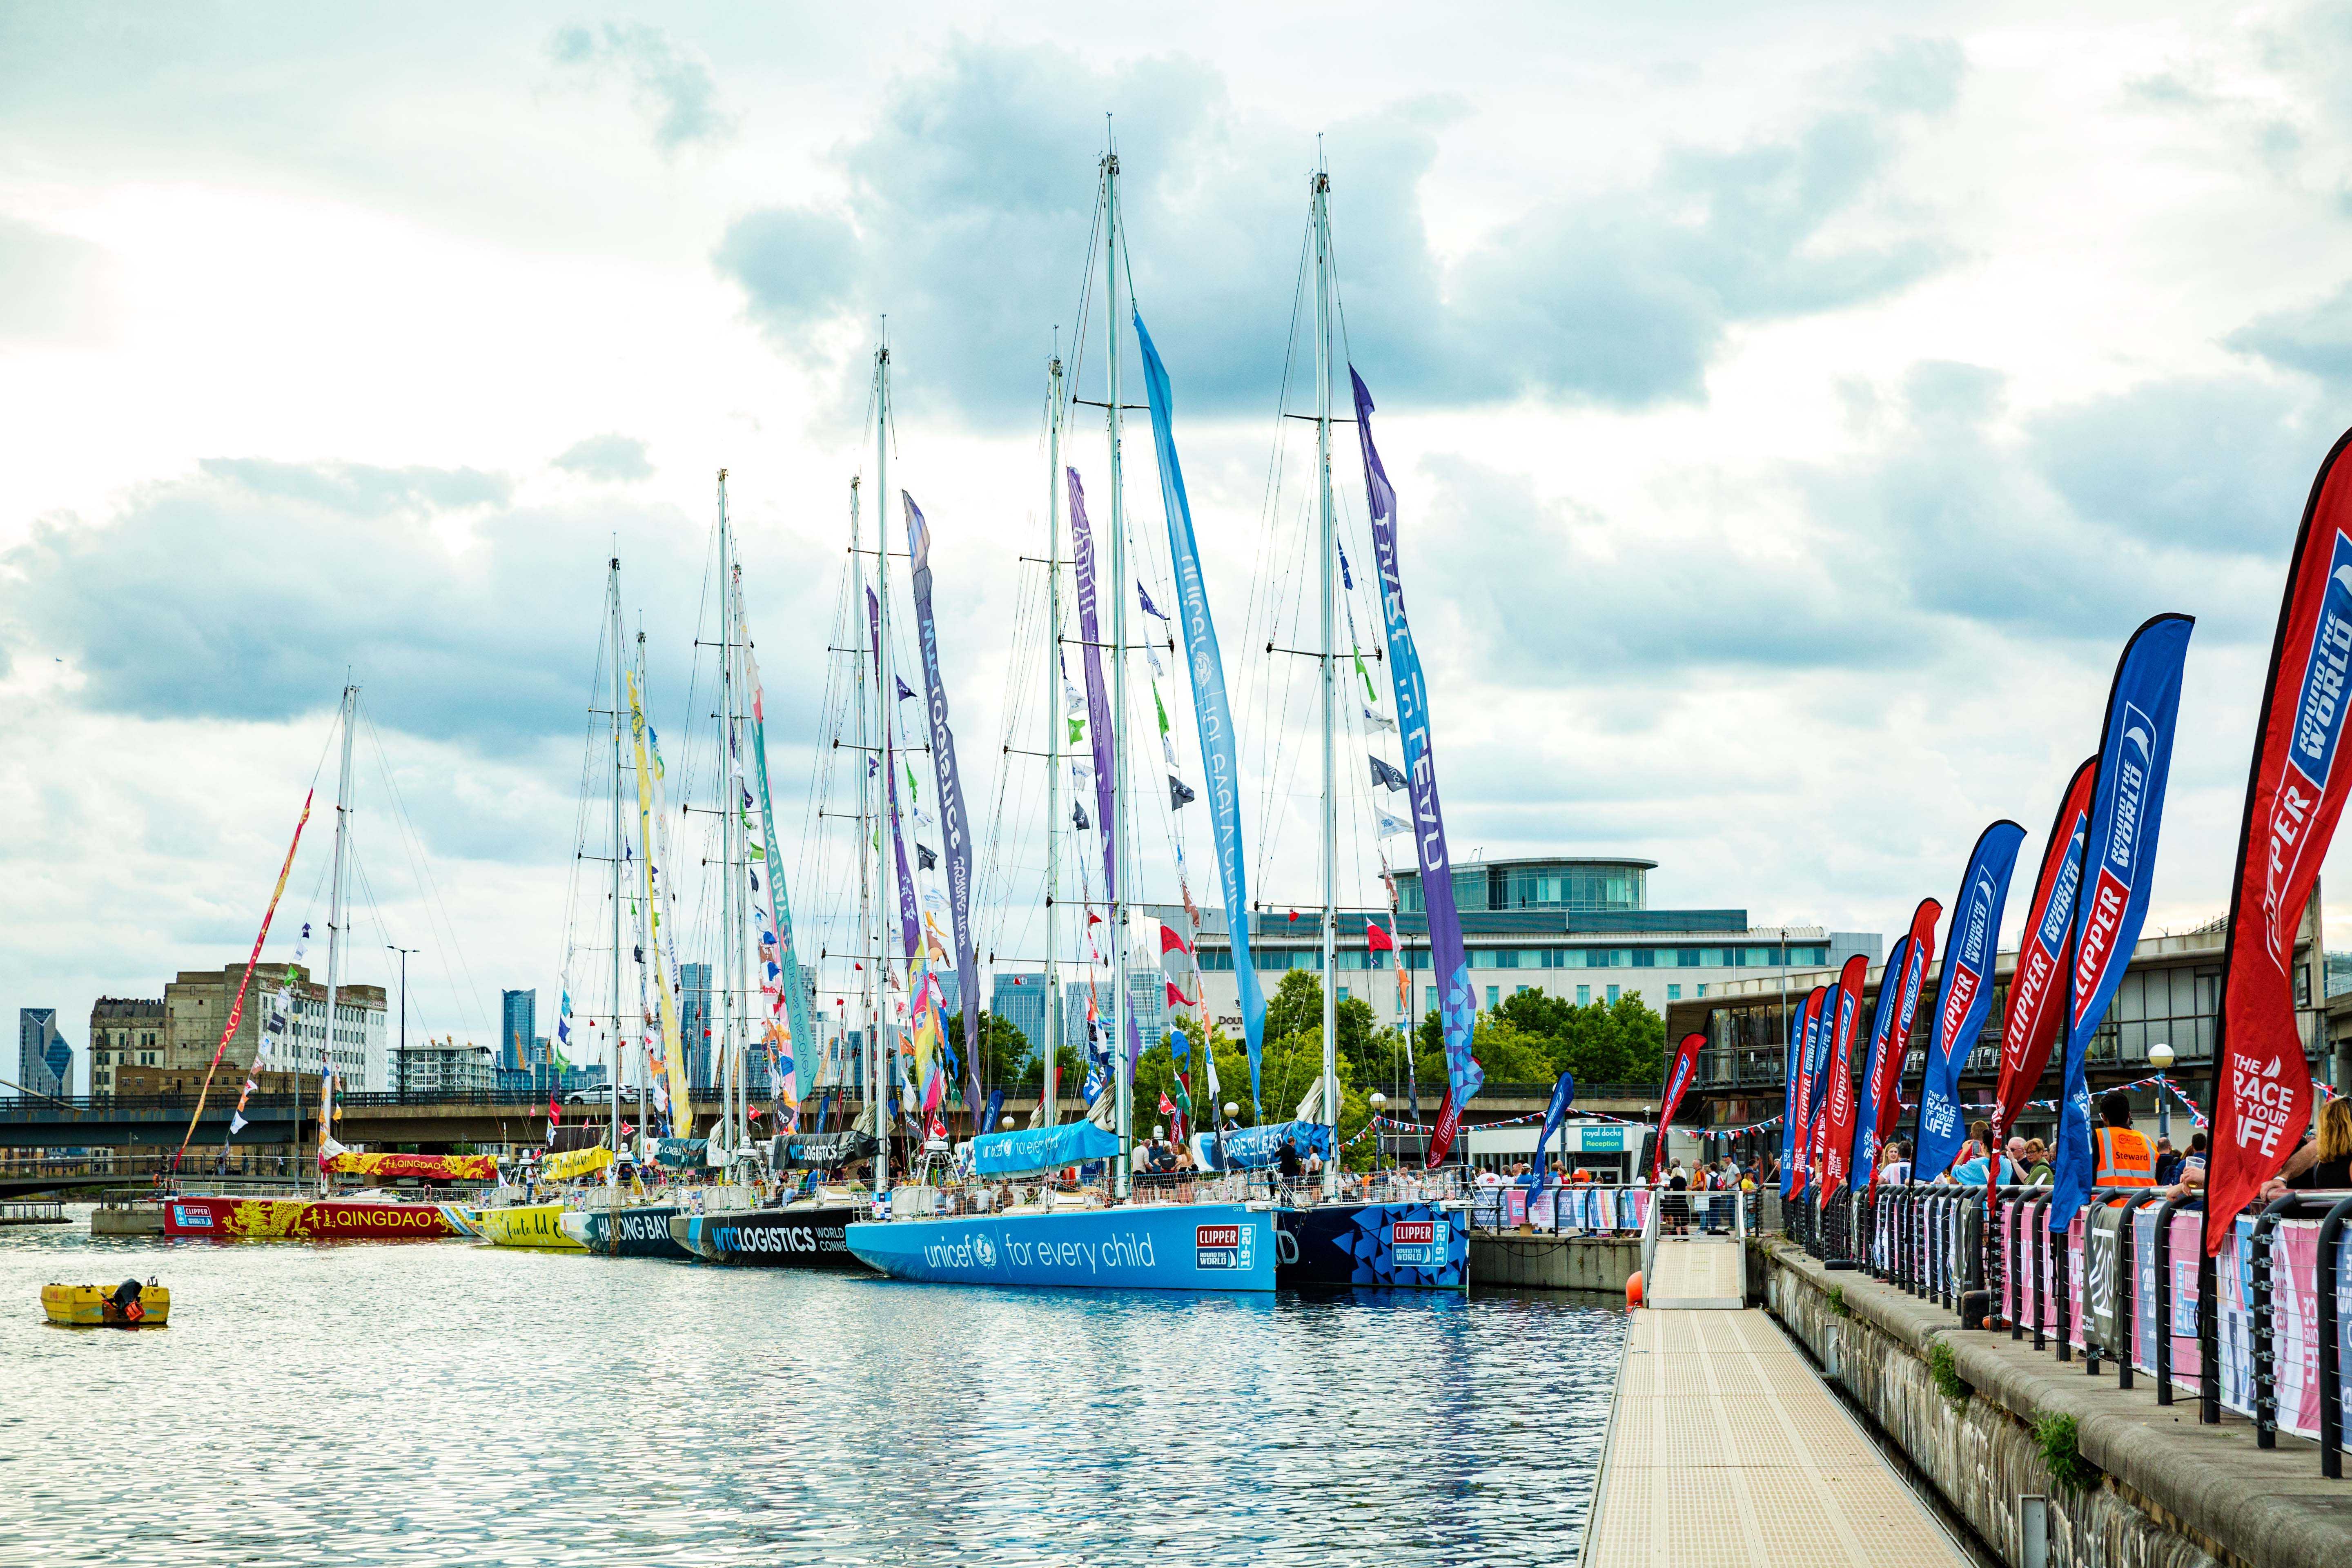 Clipper boats in the Royal Docks